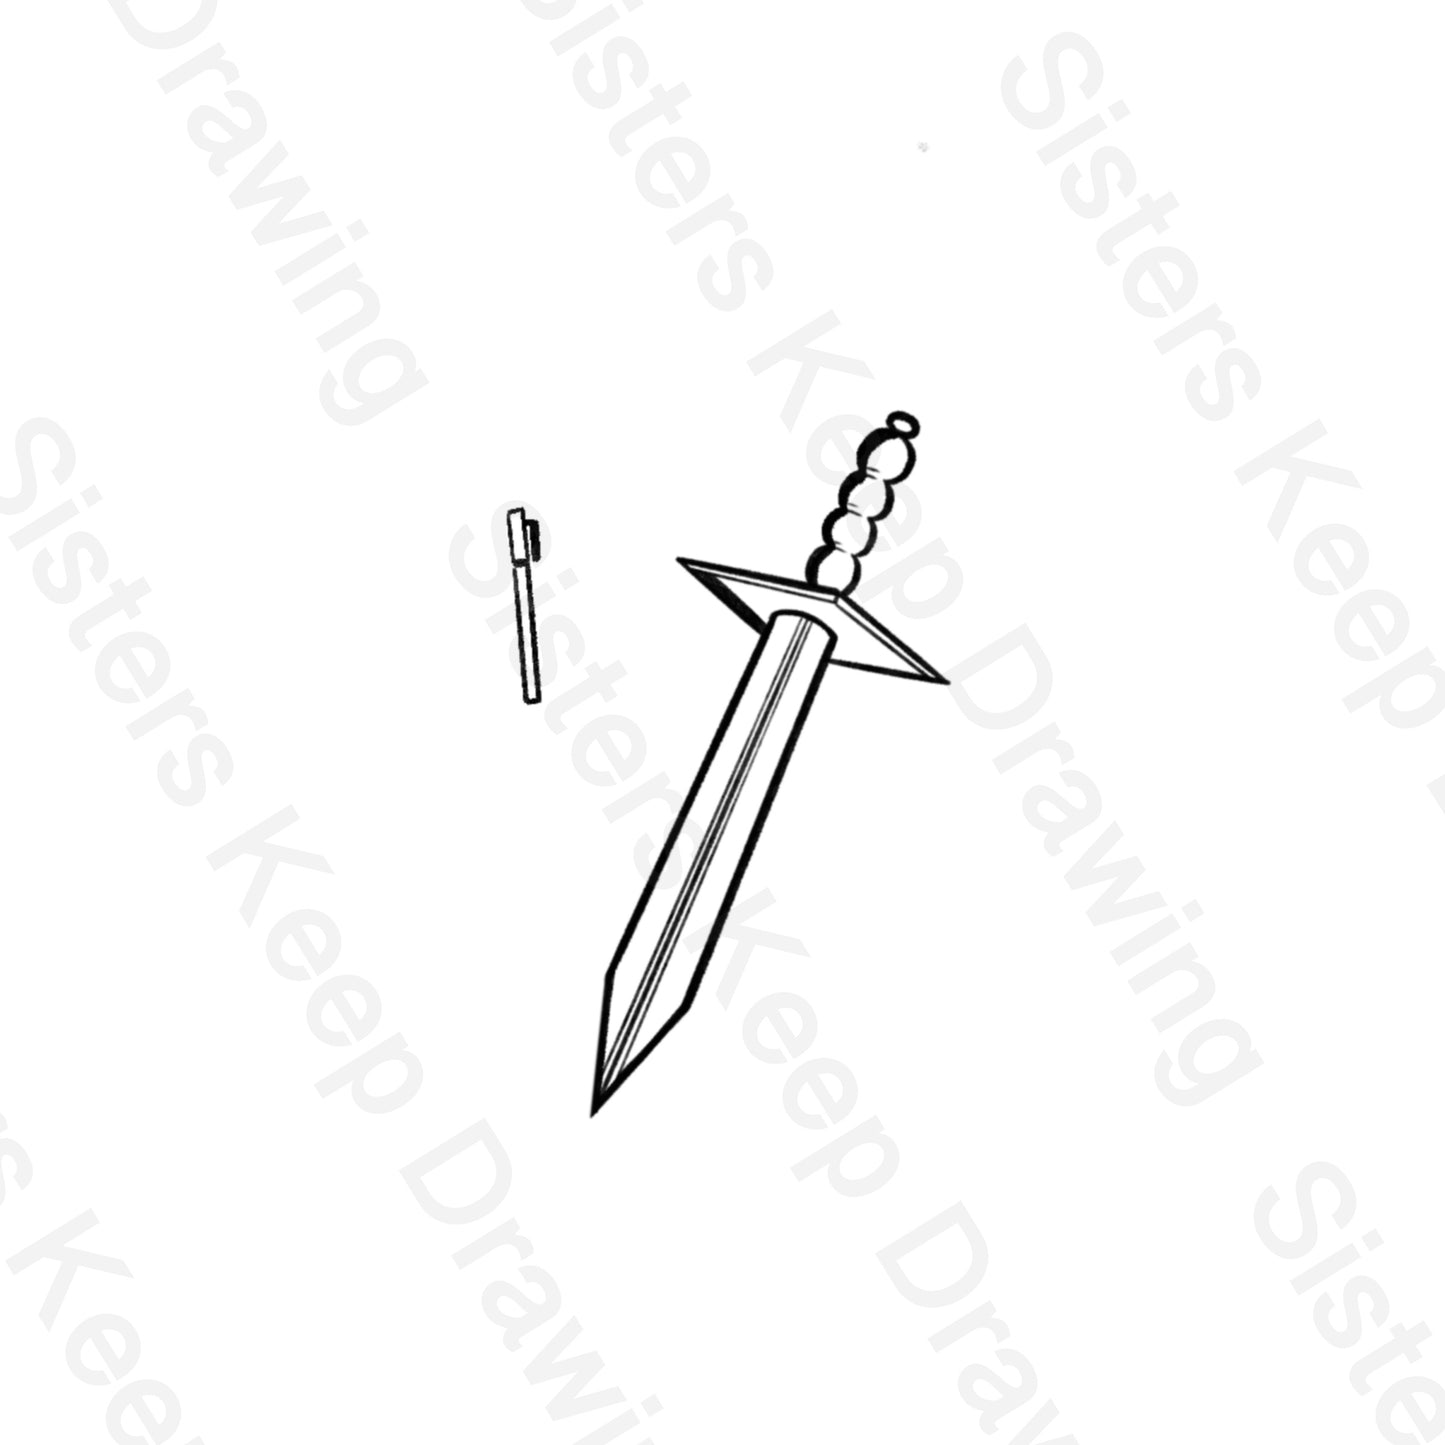 Percy jackson pen and Annabeths knife - Tattoo Transparent Permission P